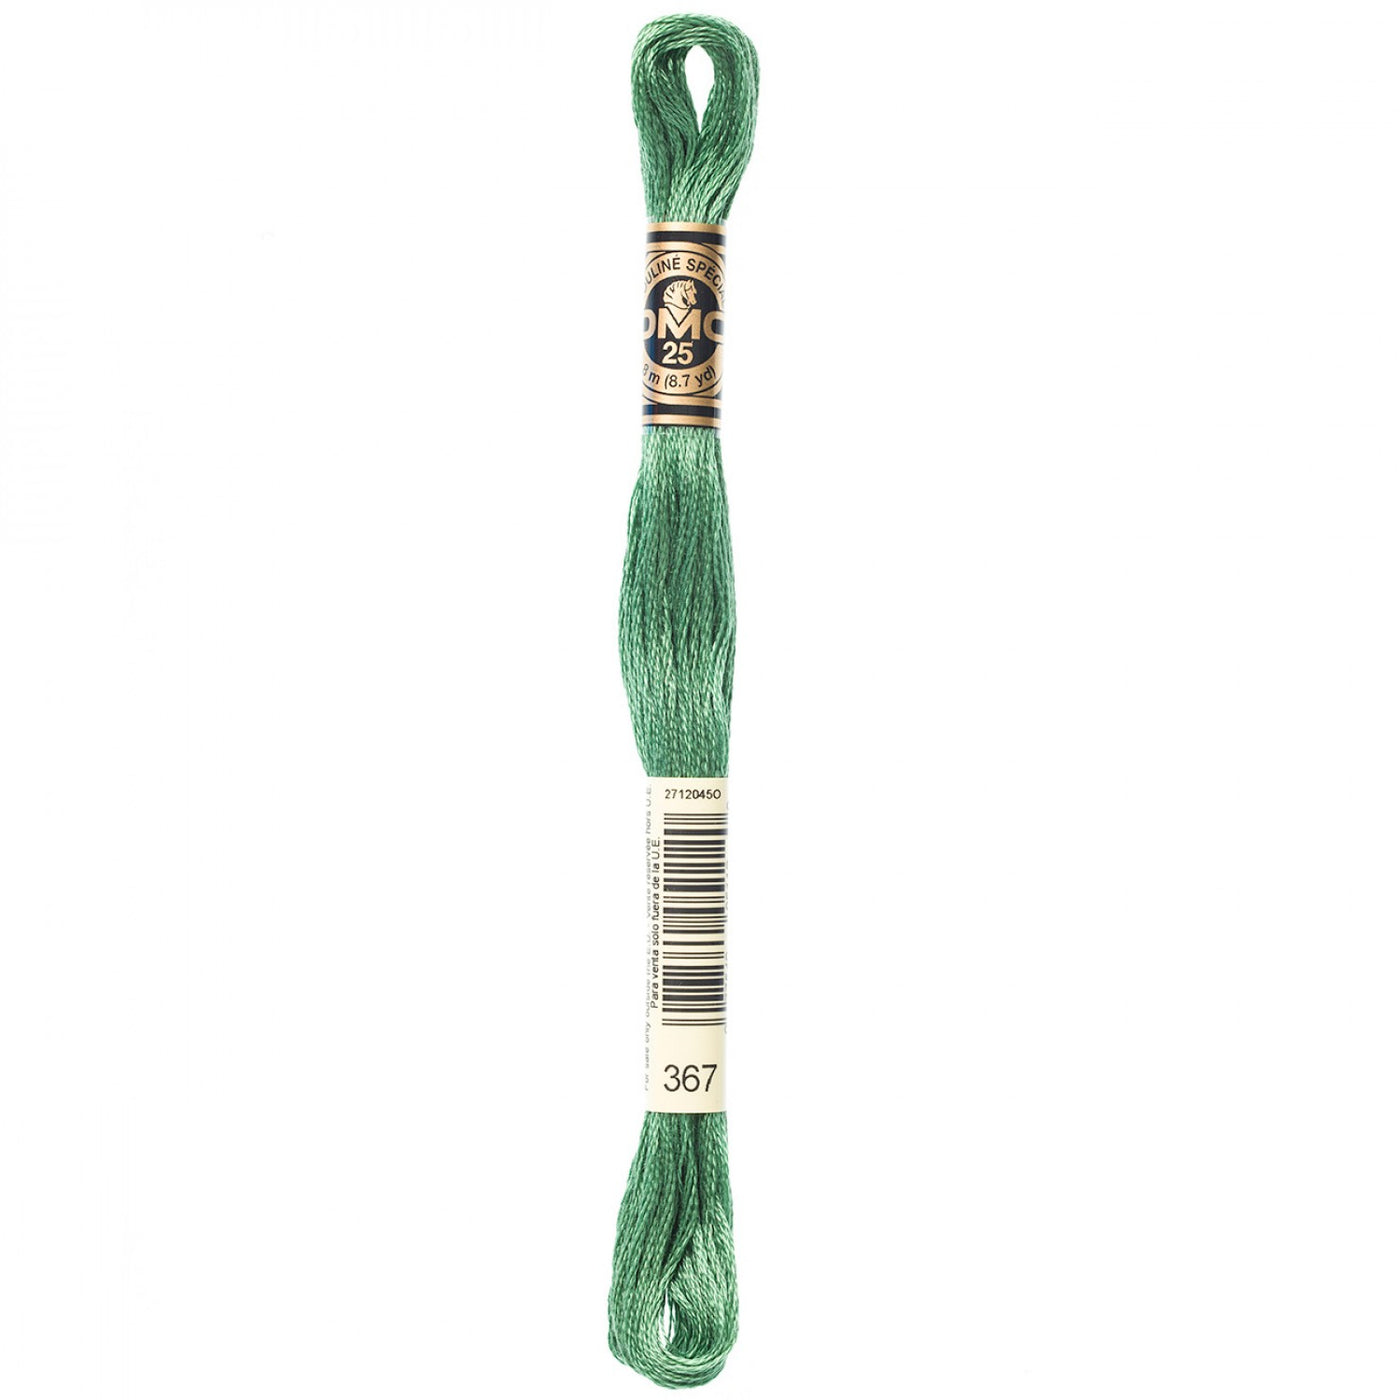 6-Strand Embroidery Floss 367 Dk Pistachio Green